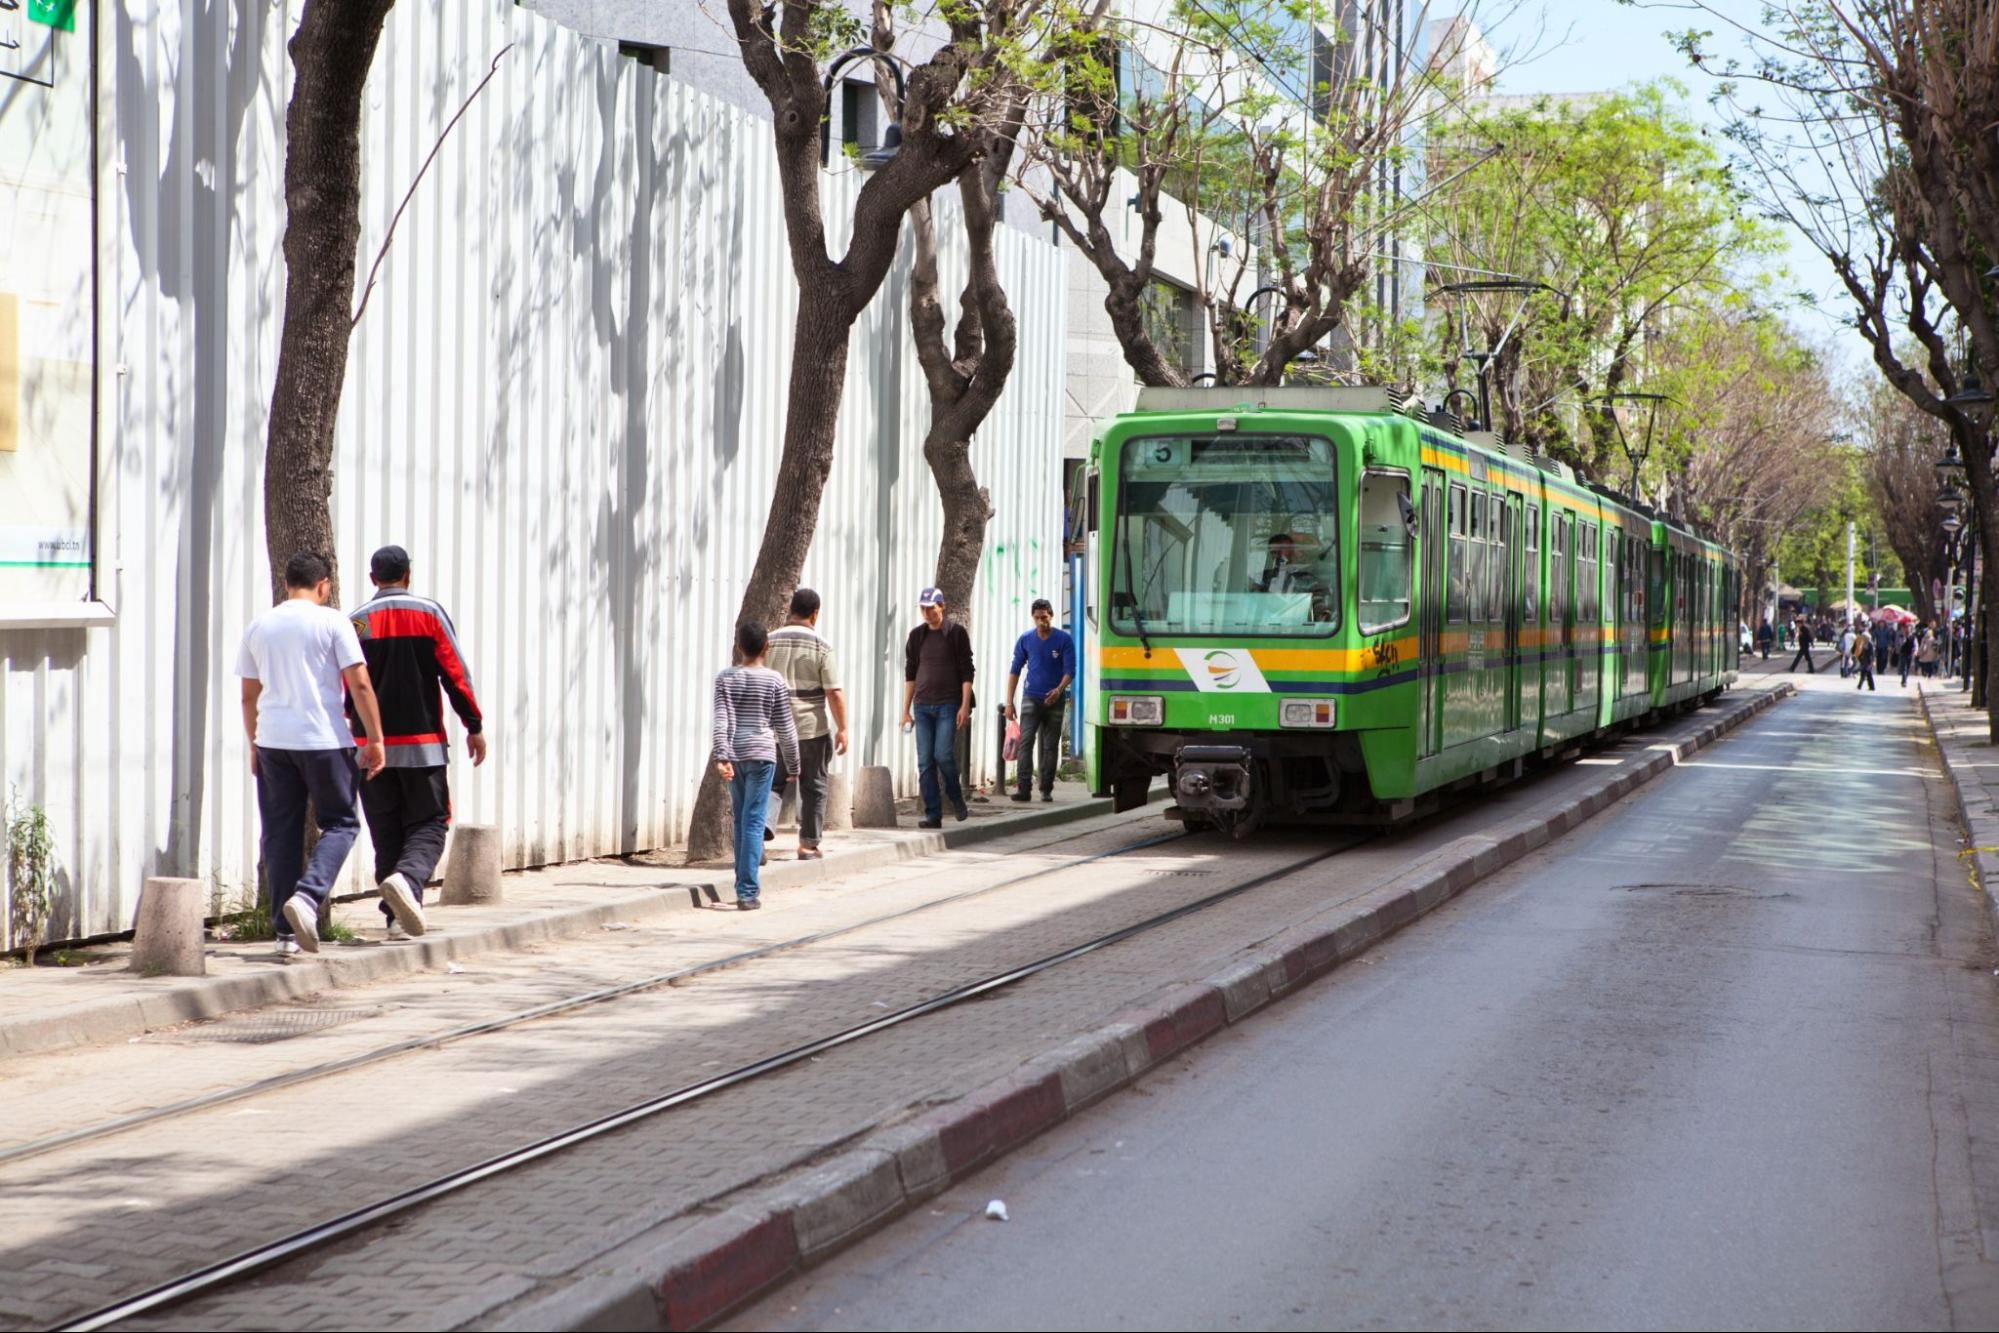 City tramway in the streets, on circa in Tunis, Tunisia